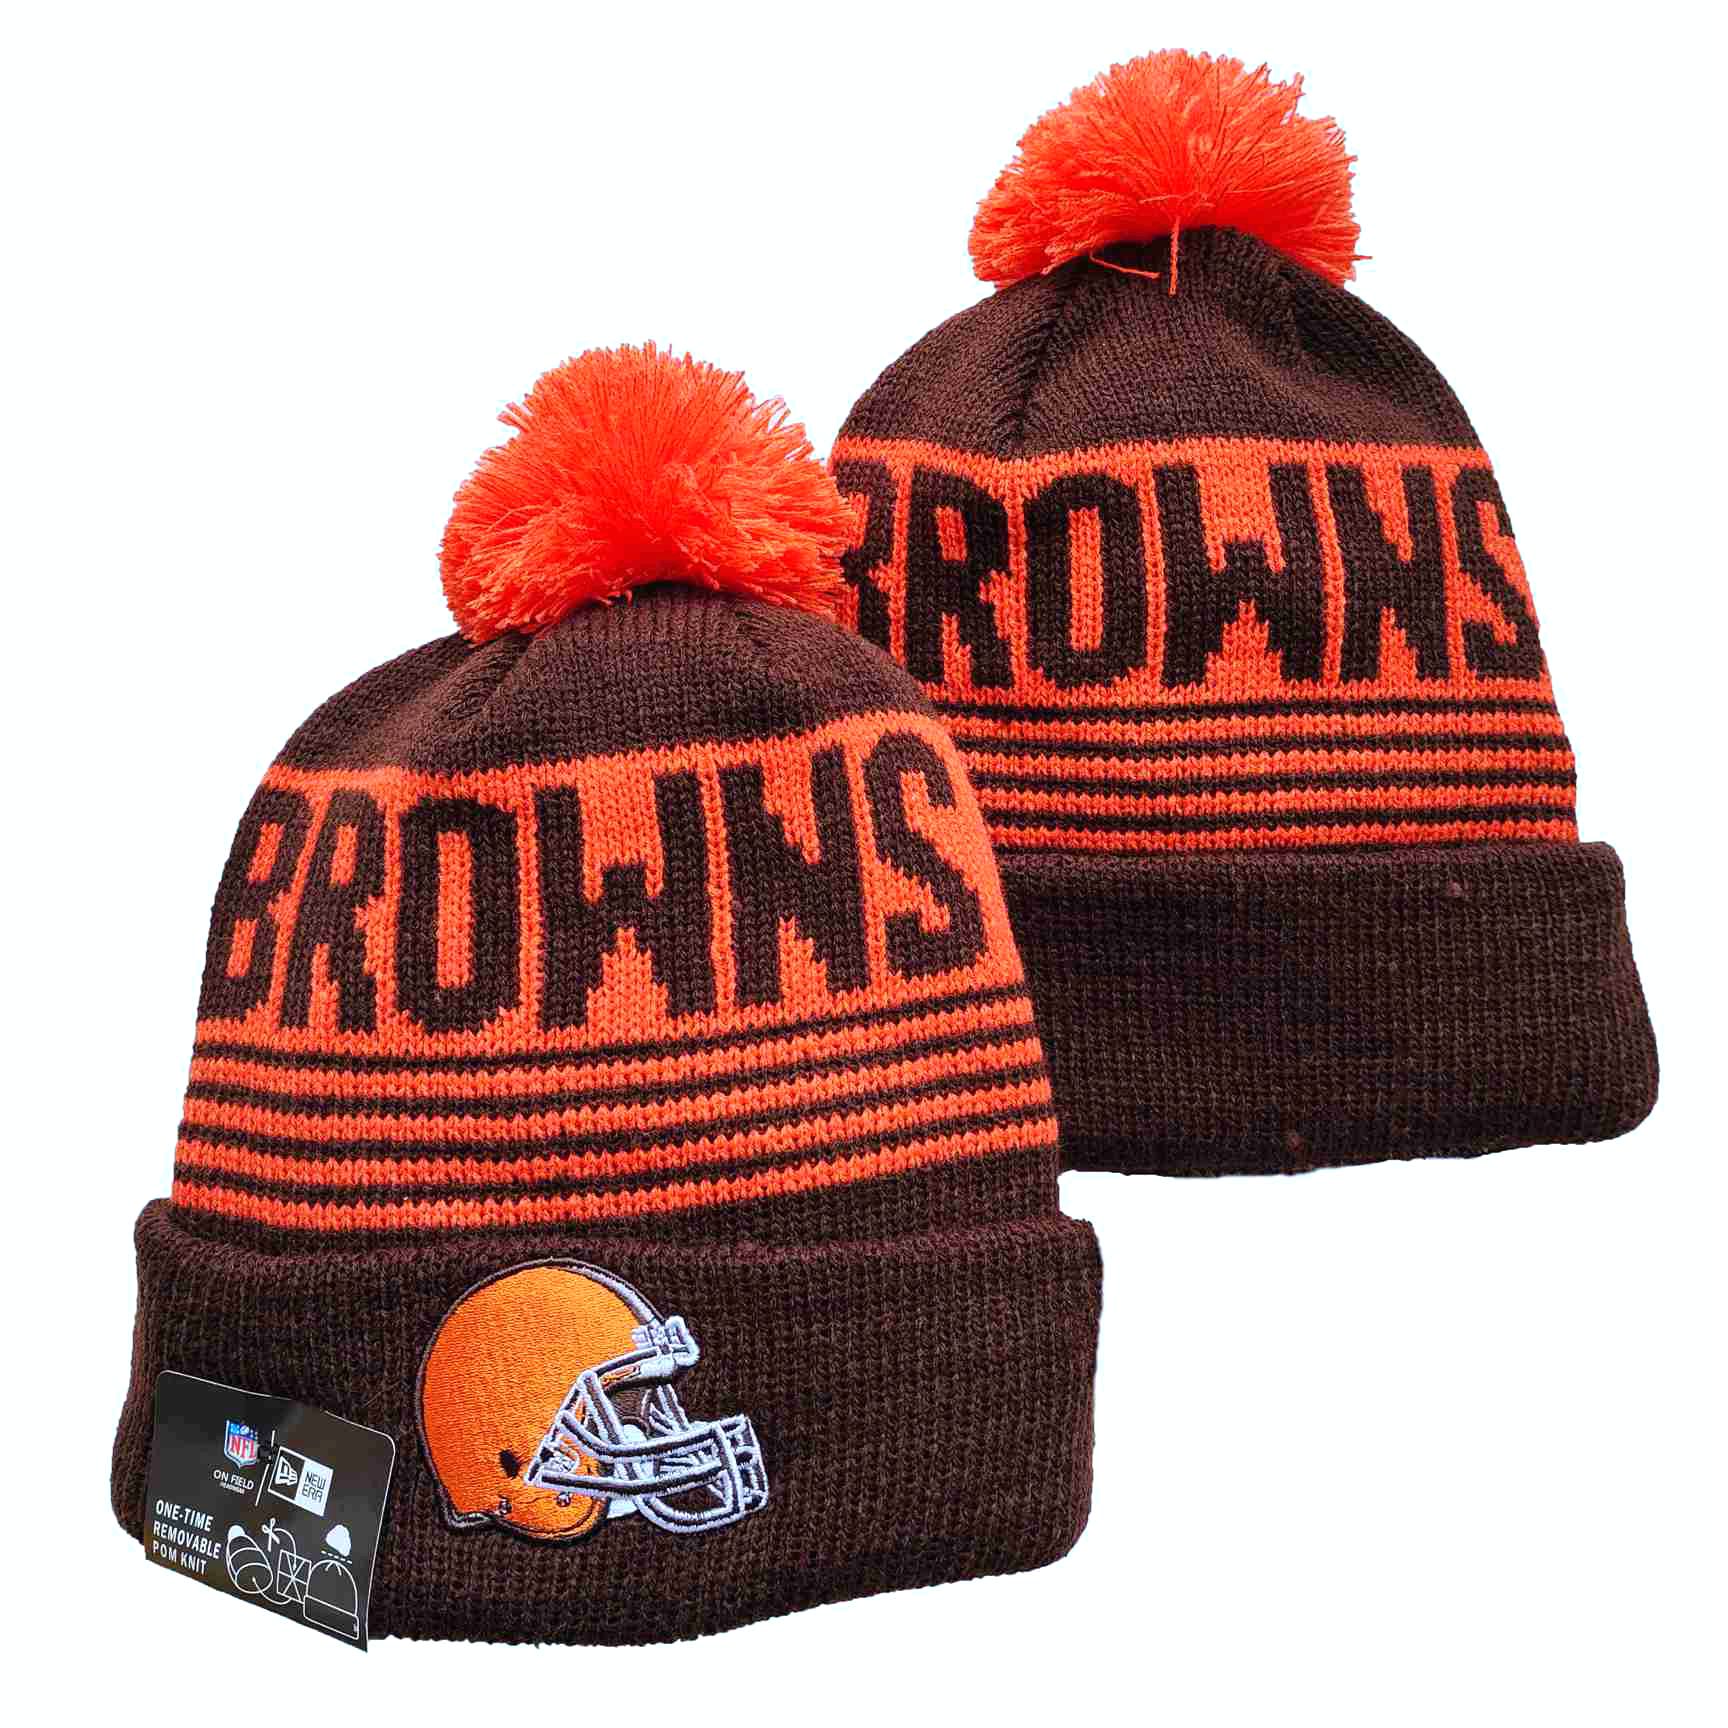 NFL Cleveland Browns Beanies Knit Hats-YD1308